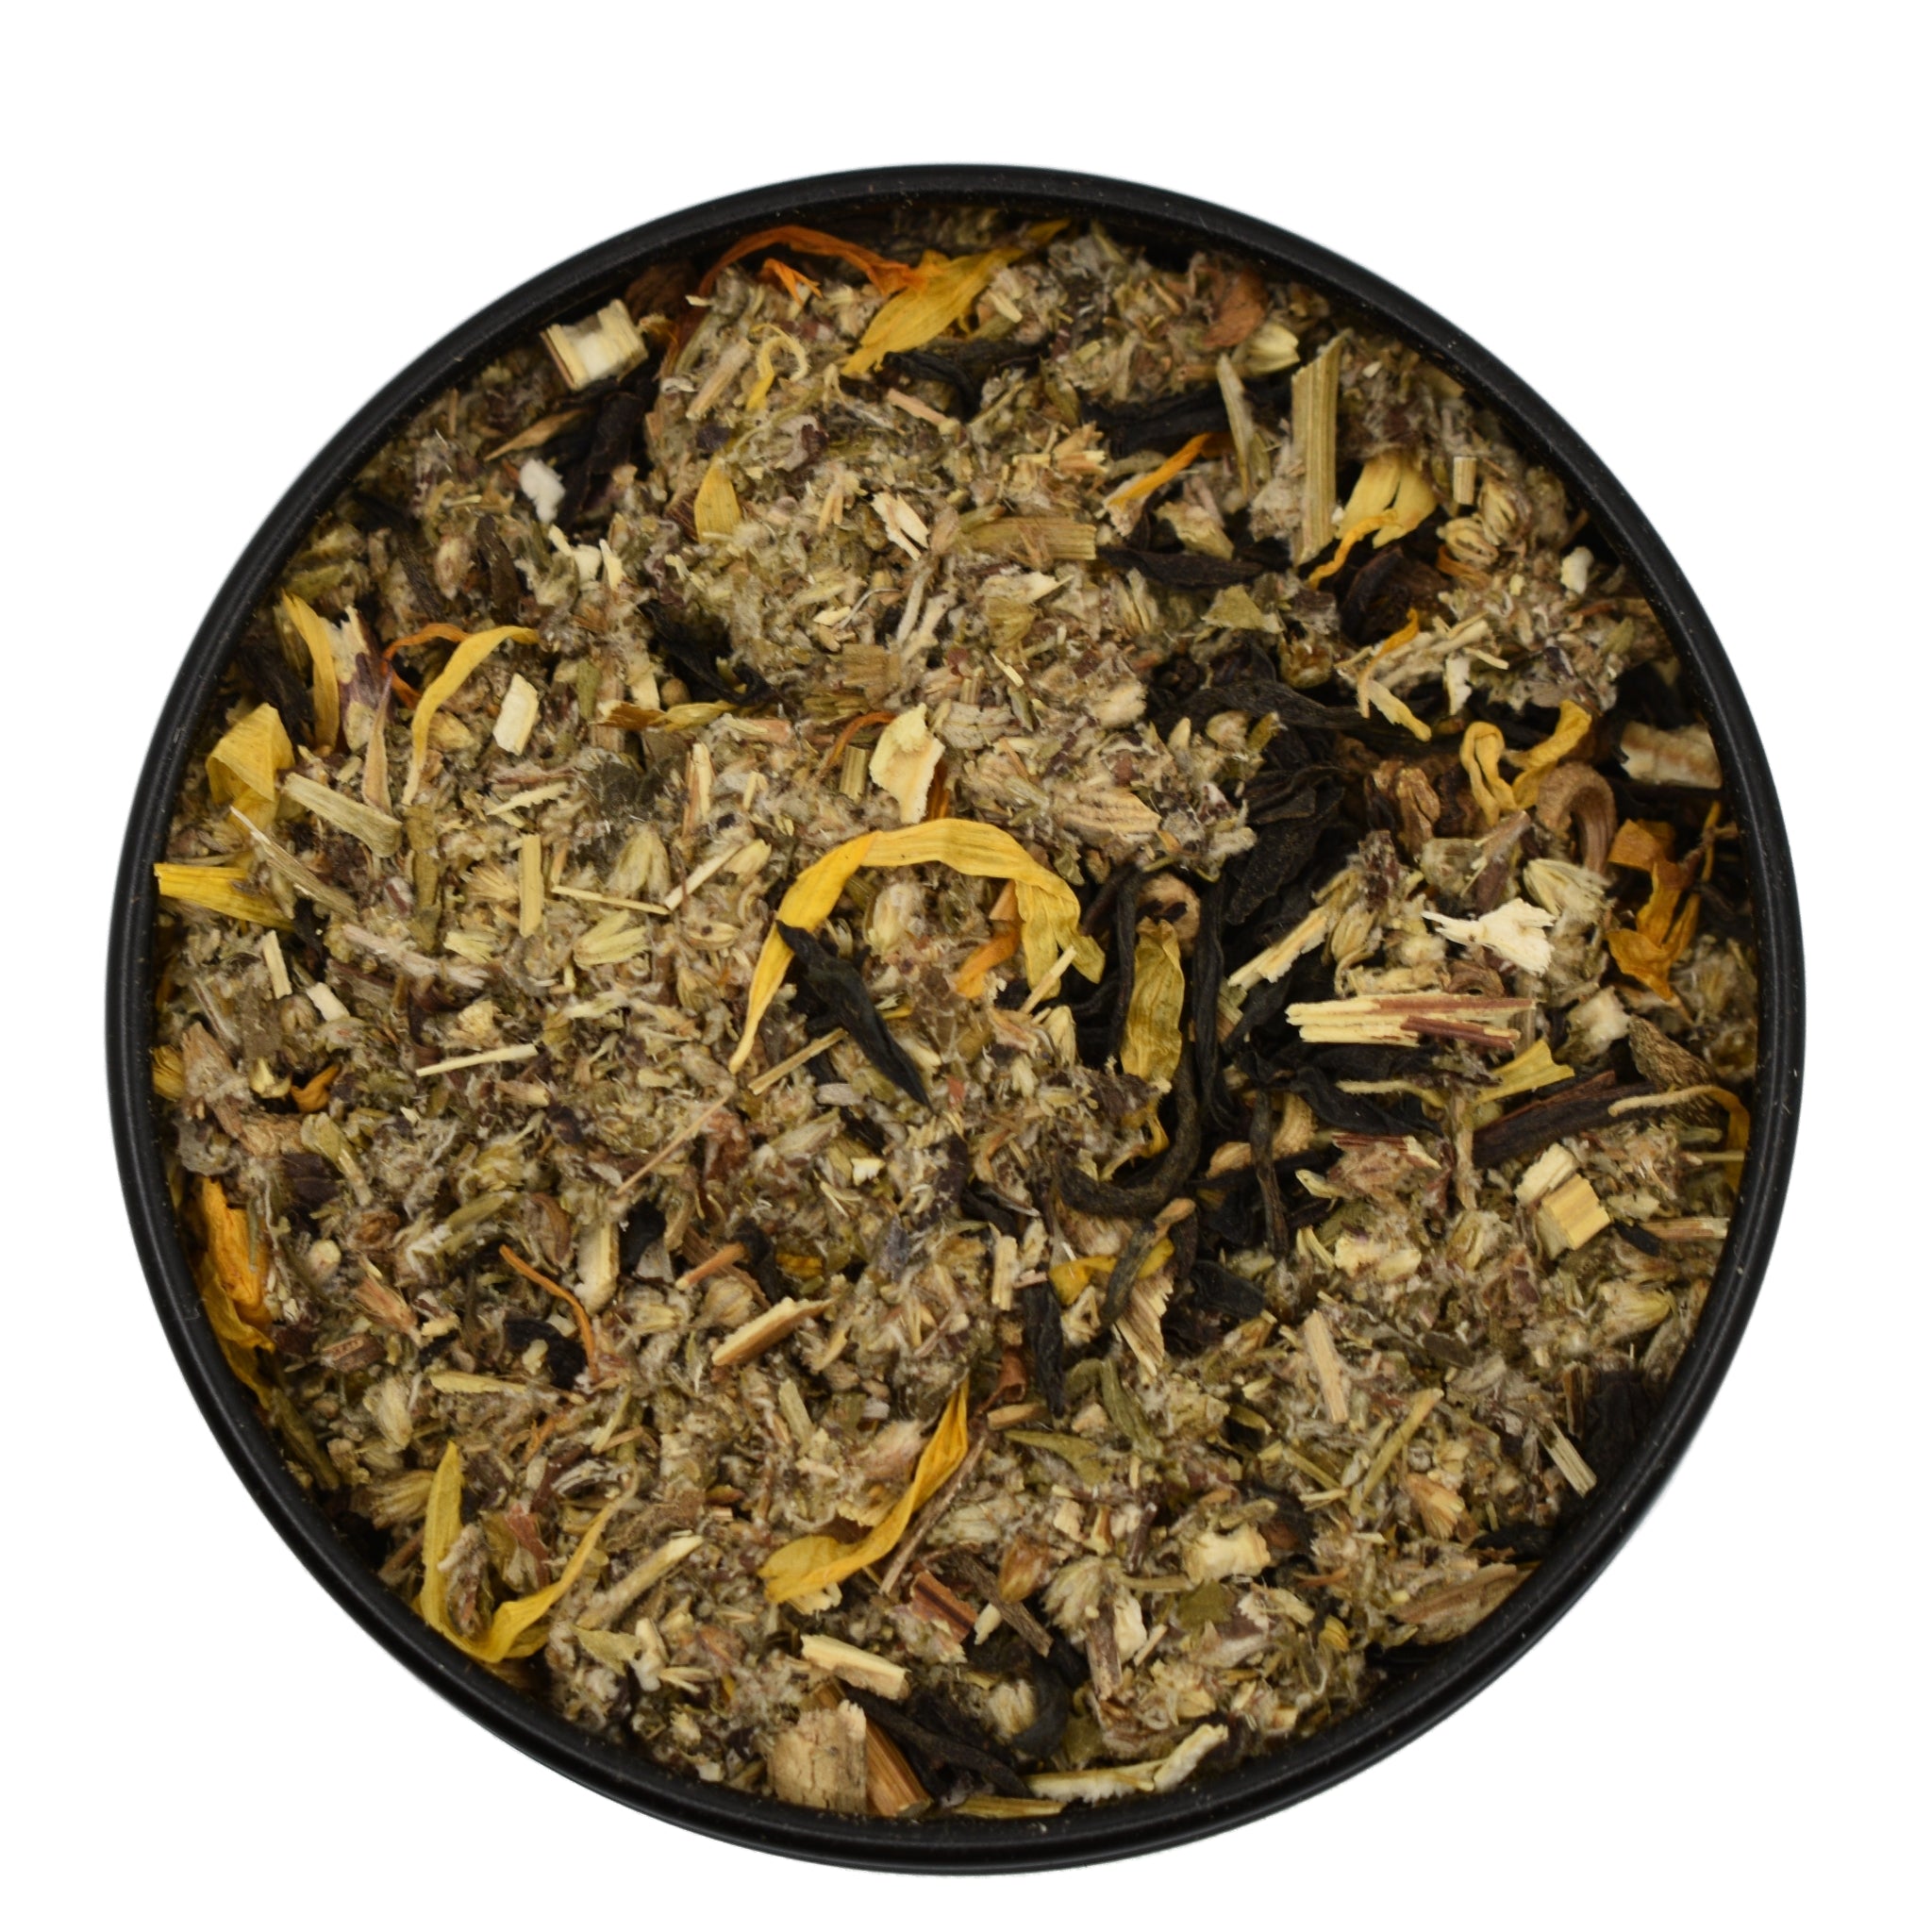 lid off and a mix of colorful herbs and tea 